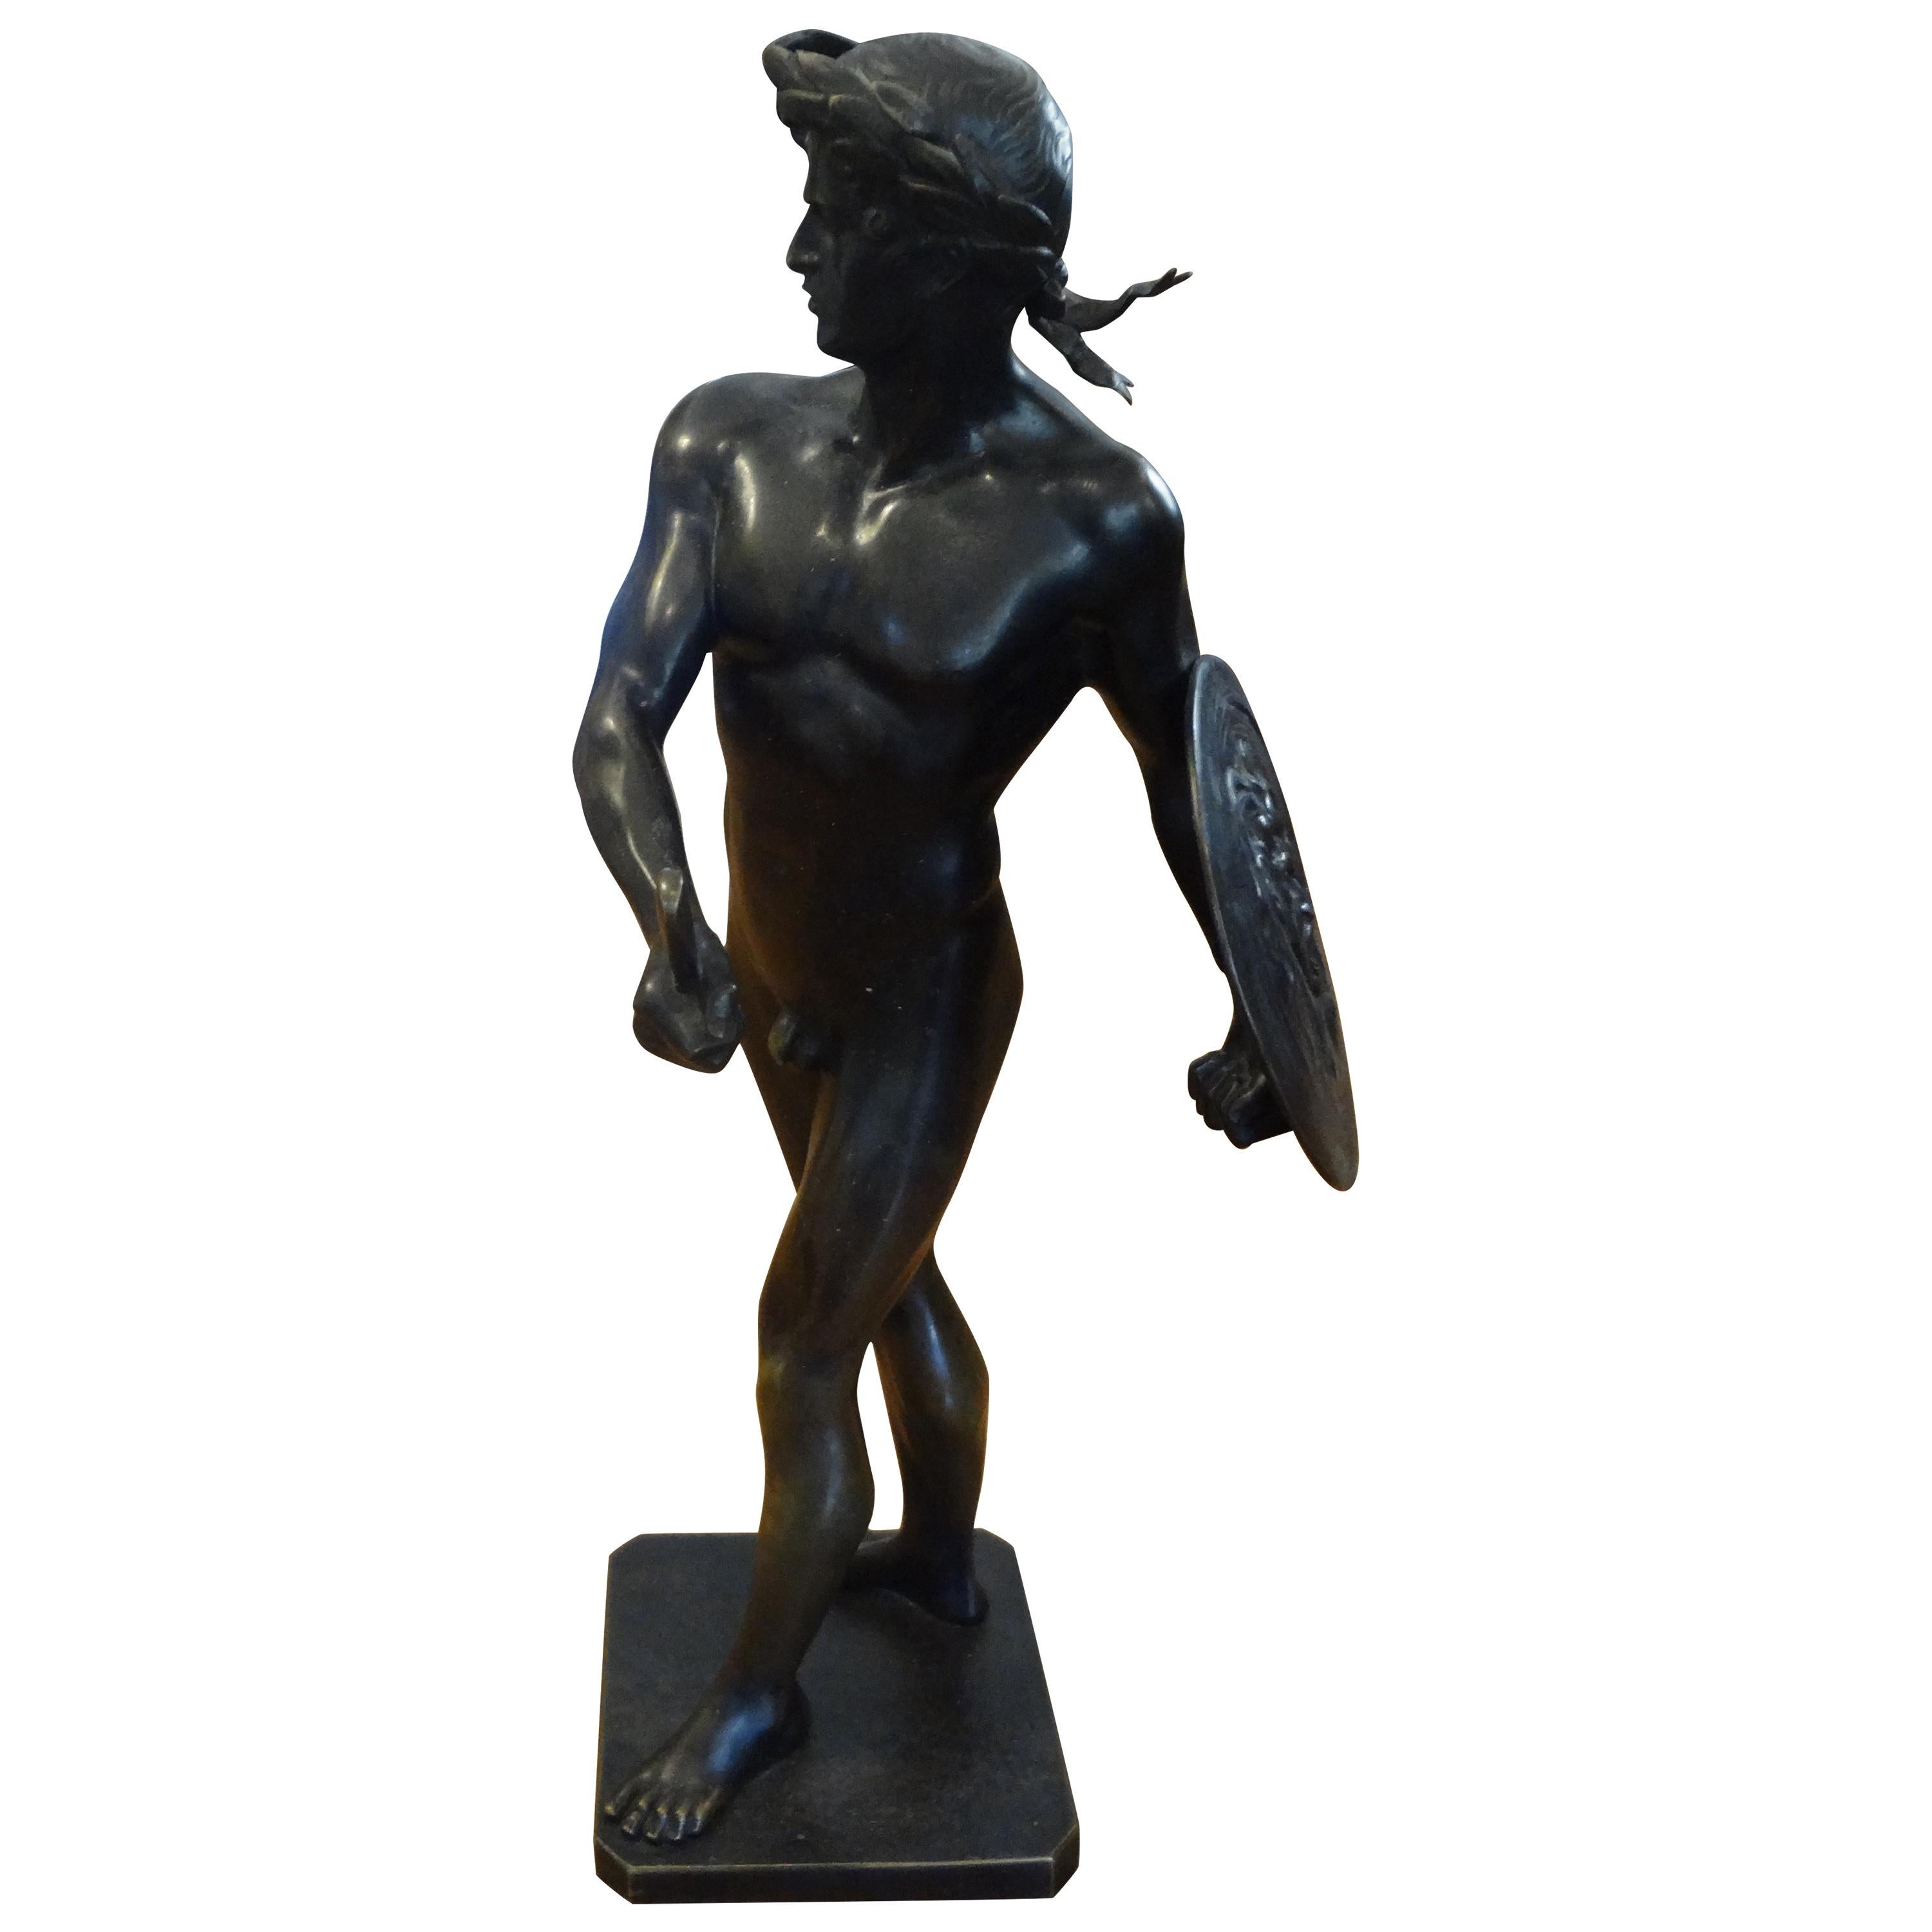 Beautifully detailed 19th century French bronze sculpture of a gladiator. Our stunning antique male bronze sculpture is in very good condition with great patina and is artist-signed. We are currently in the process of researching the artist